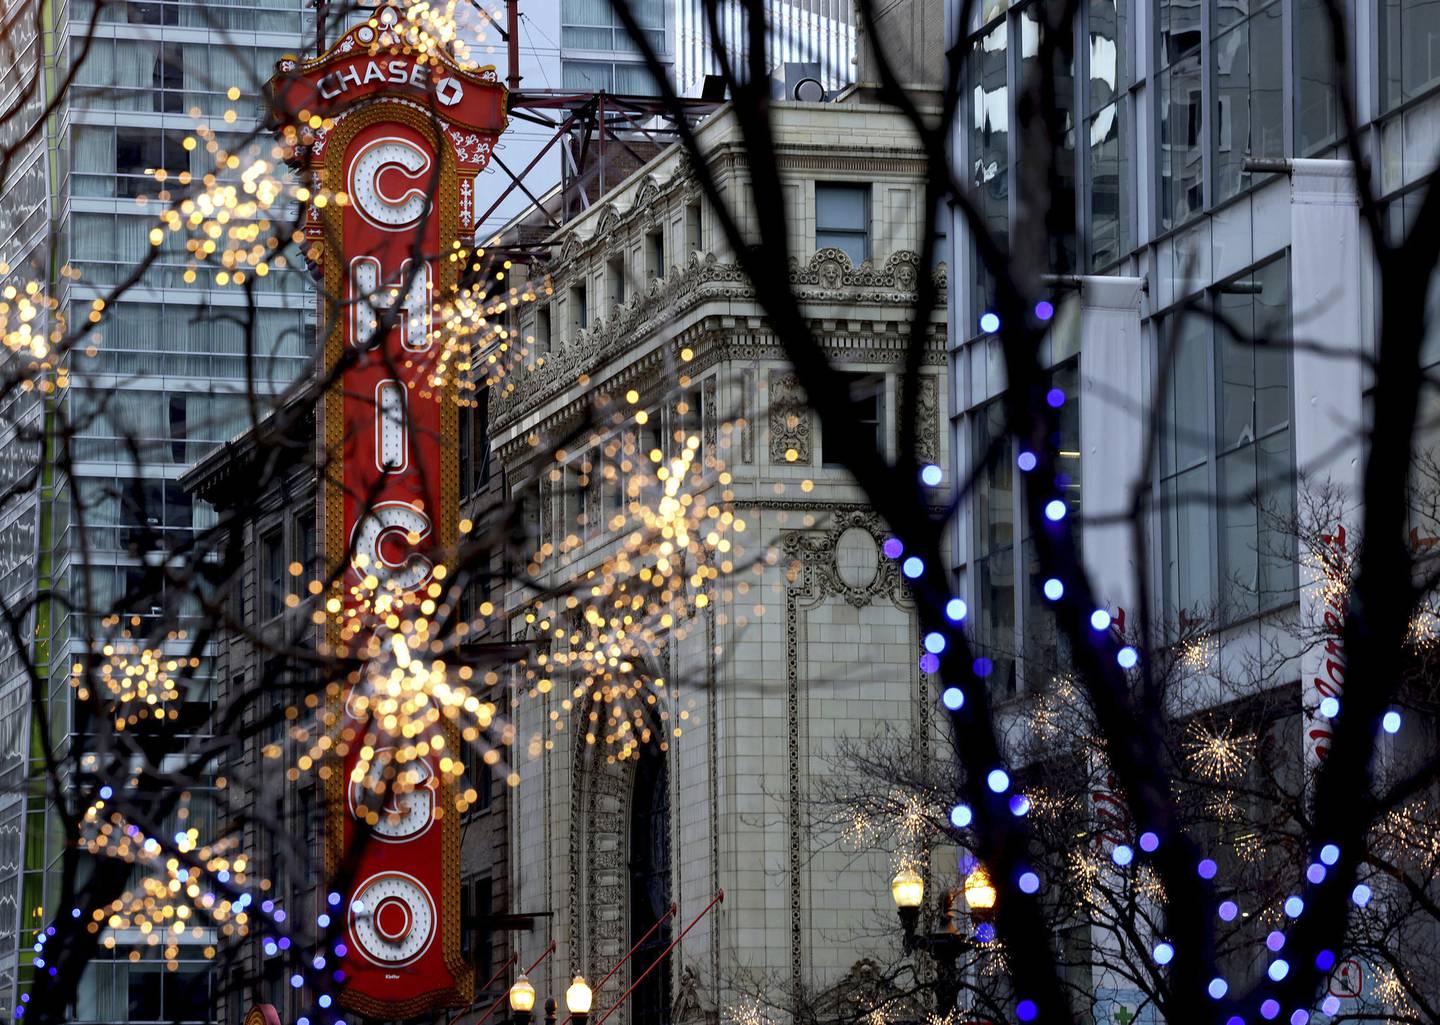 Chicago Theatre and Christmas lights galore at State Street on Dec. 8, 2022.  